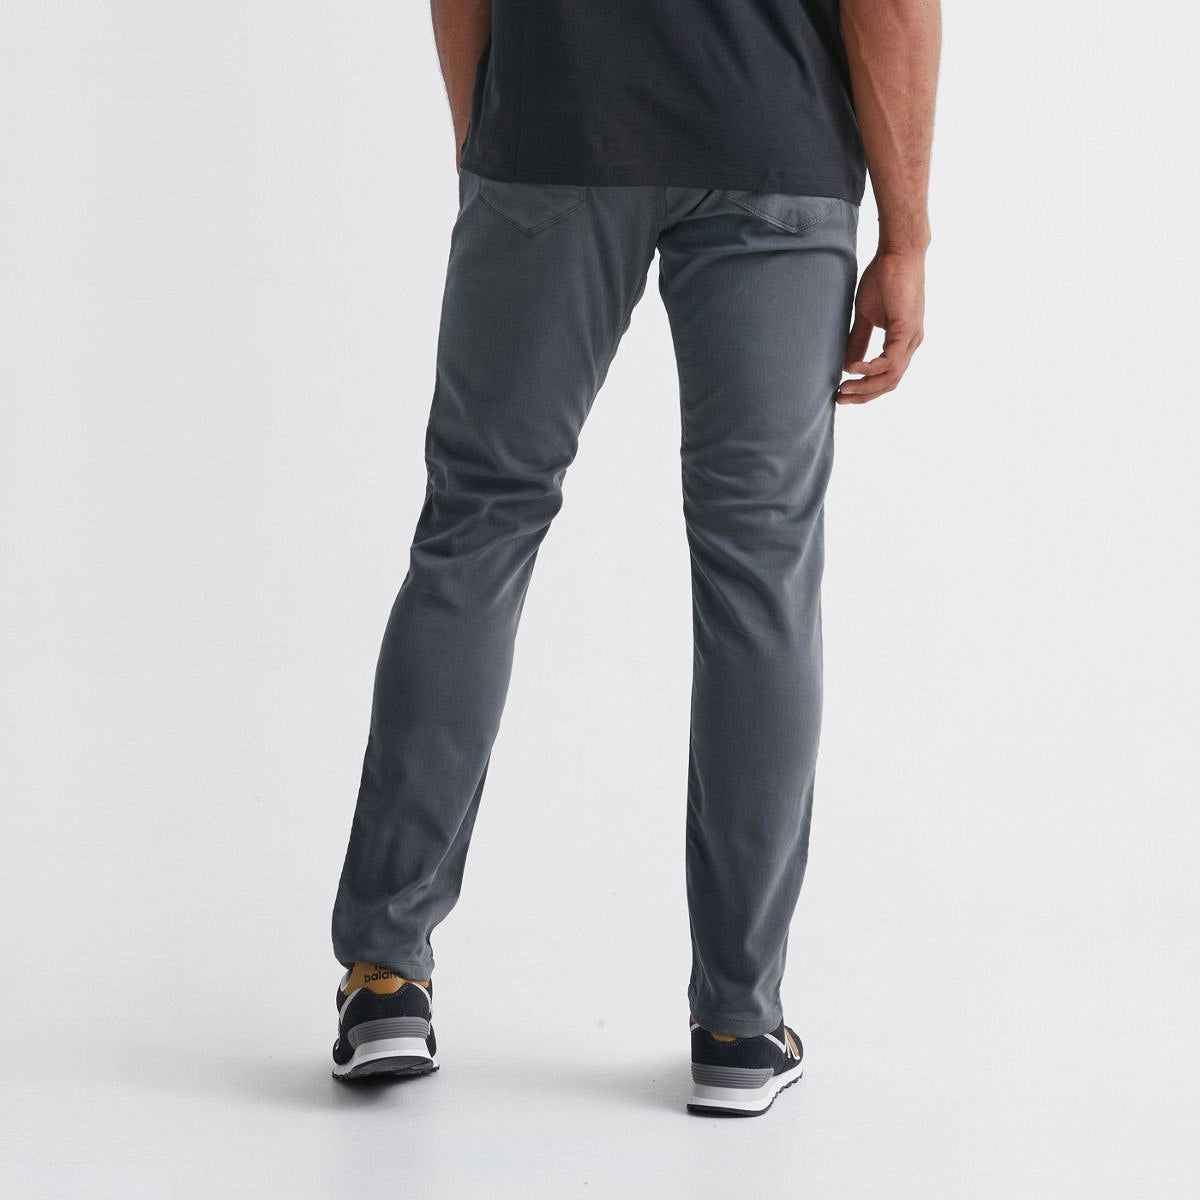 Duer - Men's No Sweat Pant Relaxed Taper  - Gull